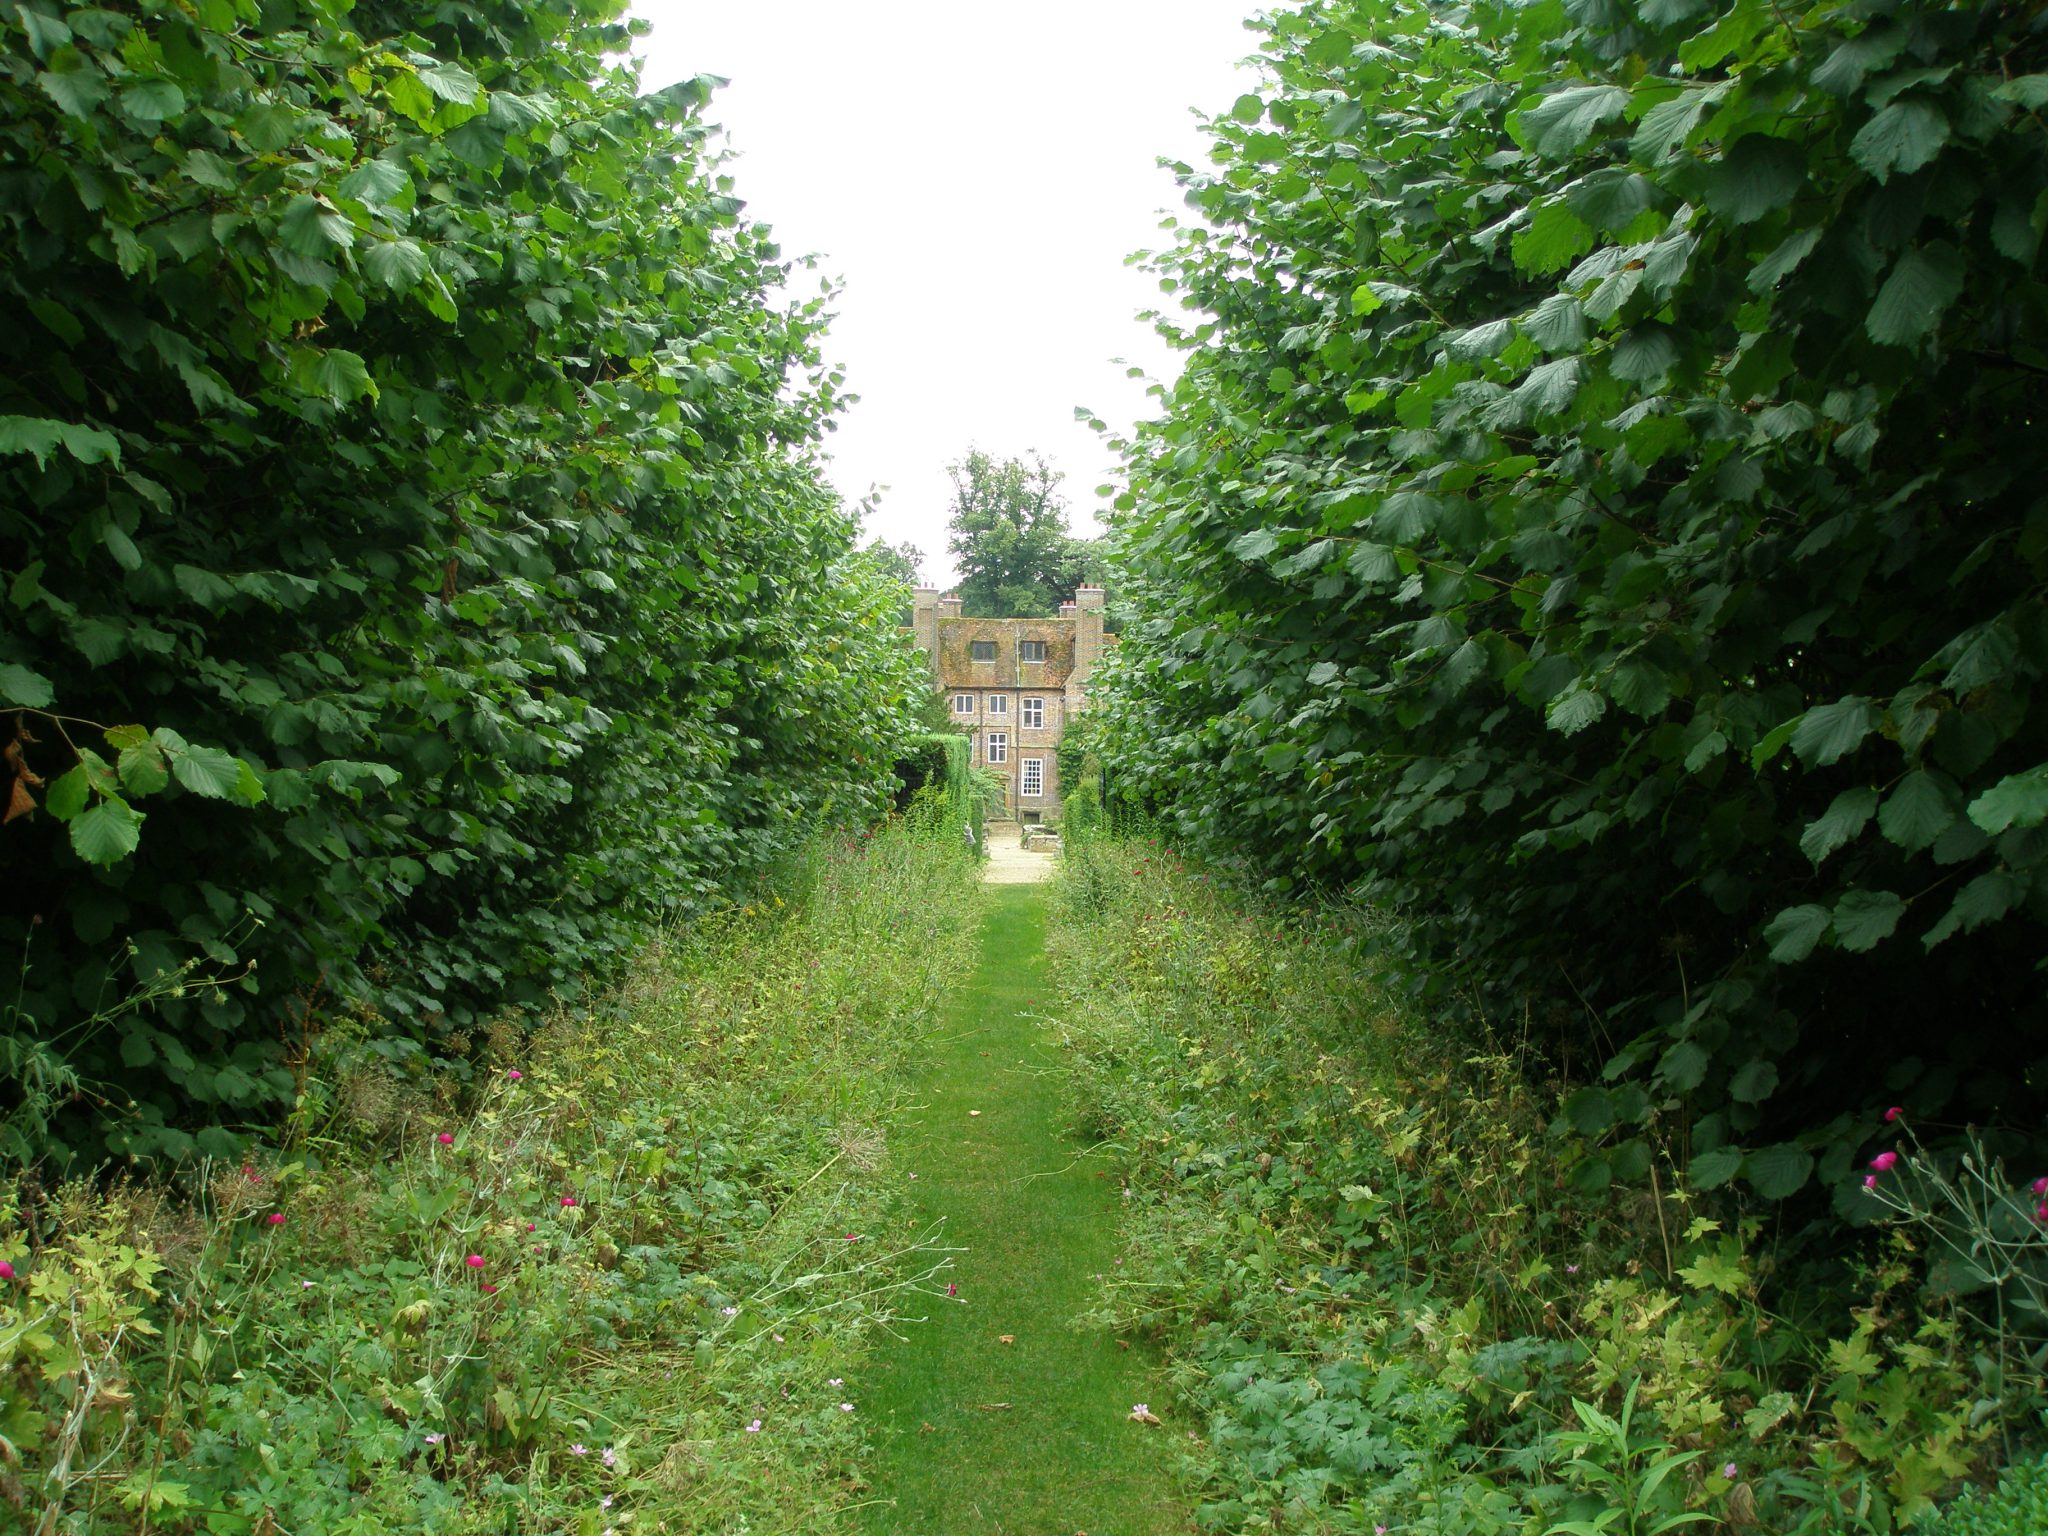 The Narrow Path that separates the Drunken Garden from the Oriental Garden. The House is in the distance.